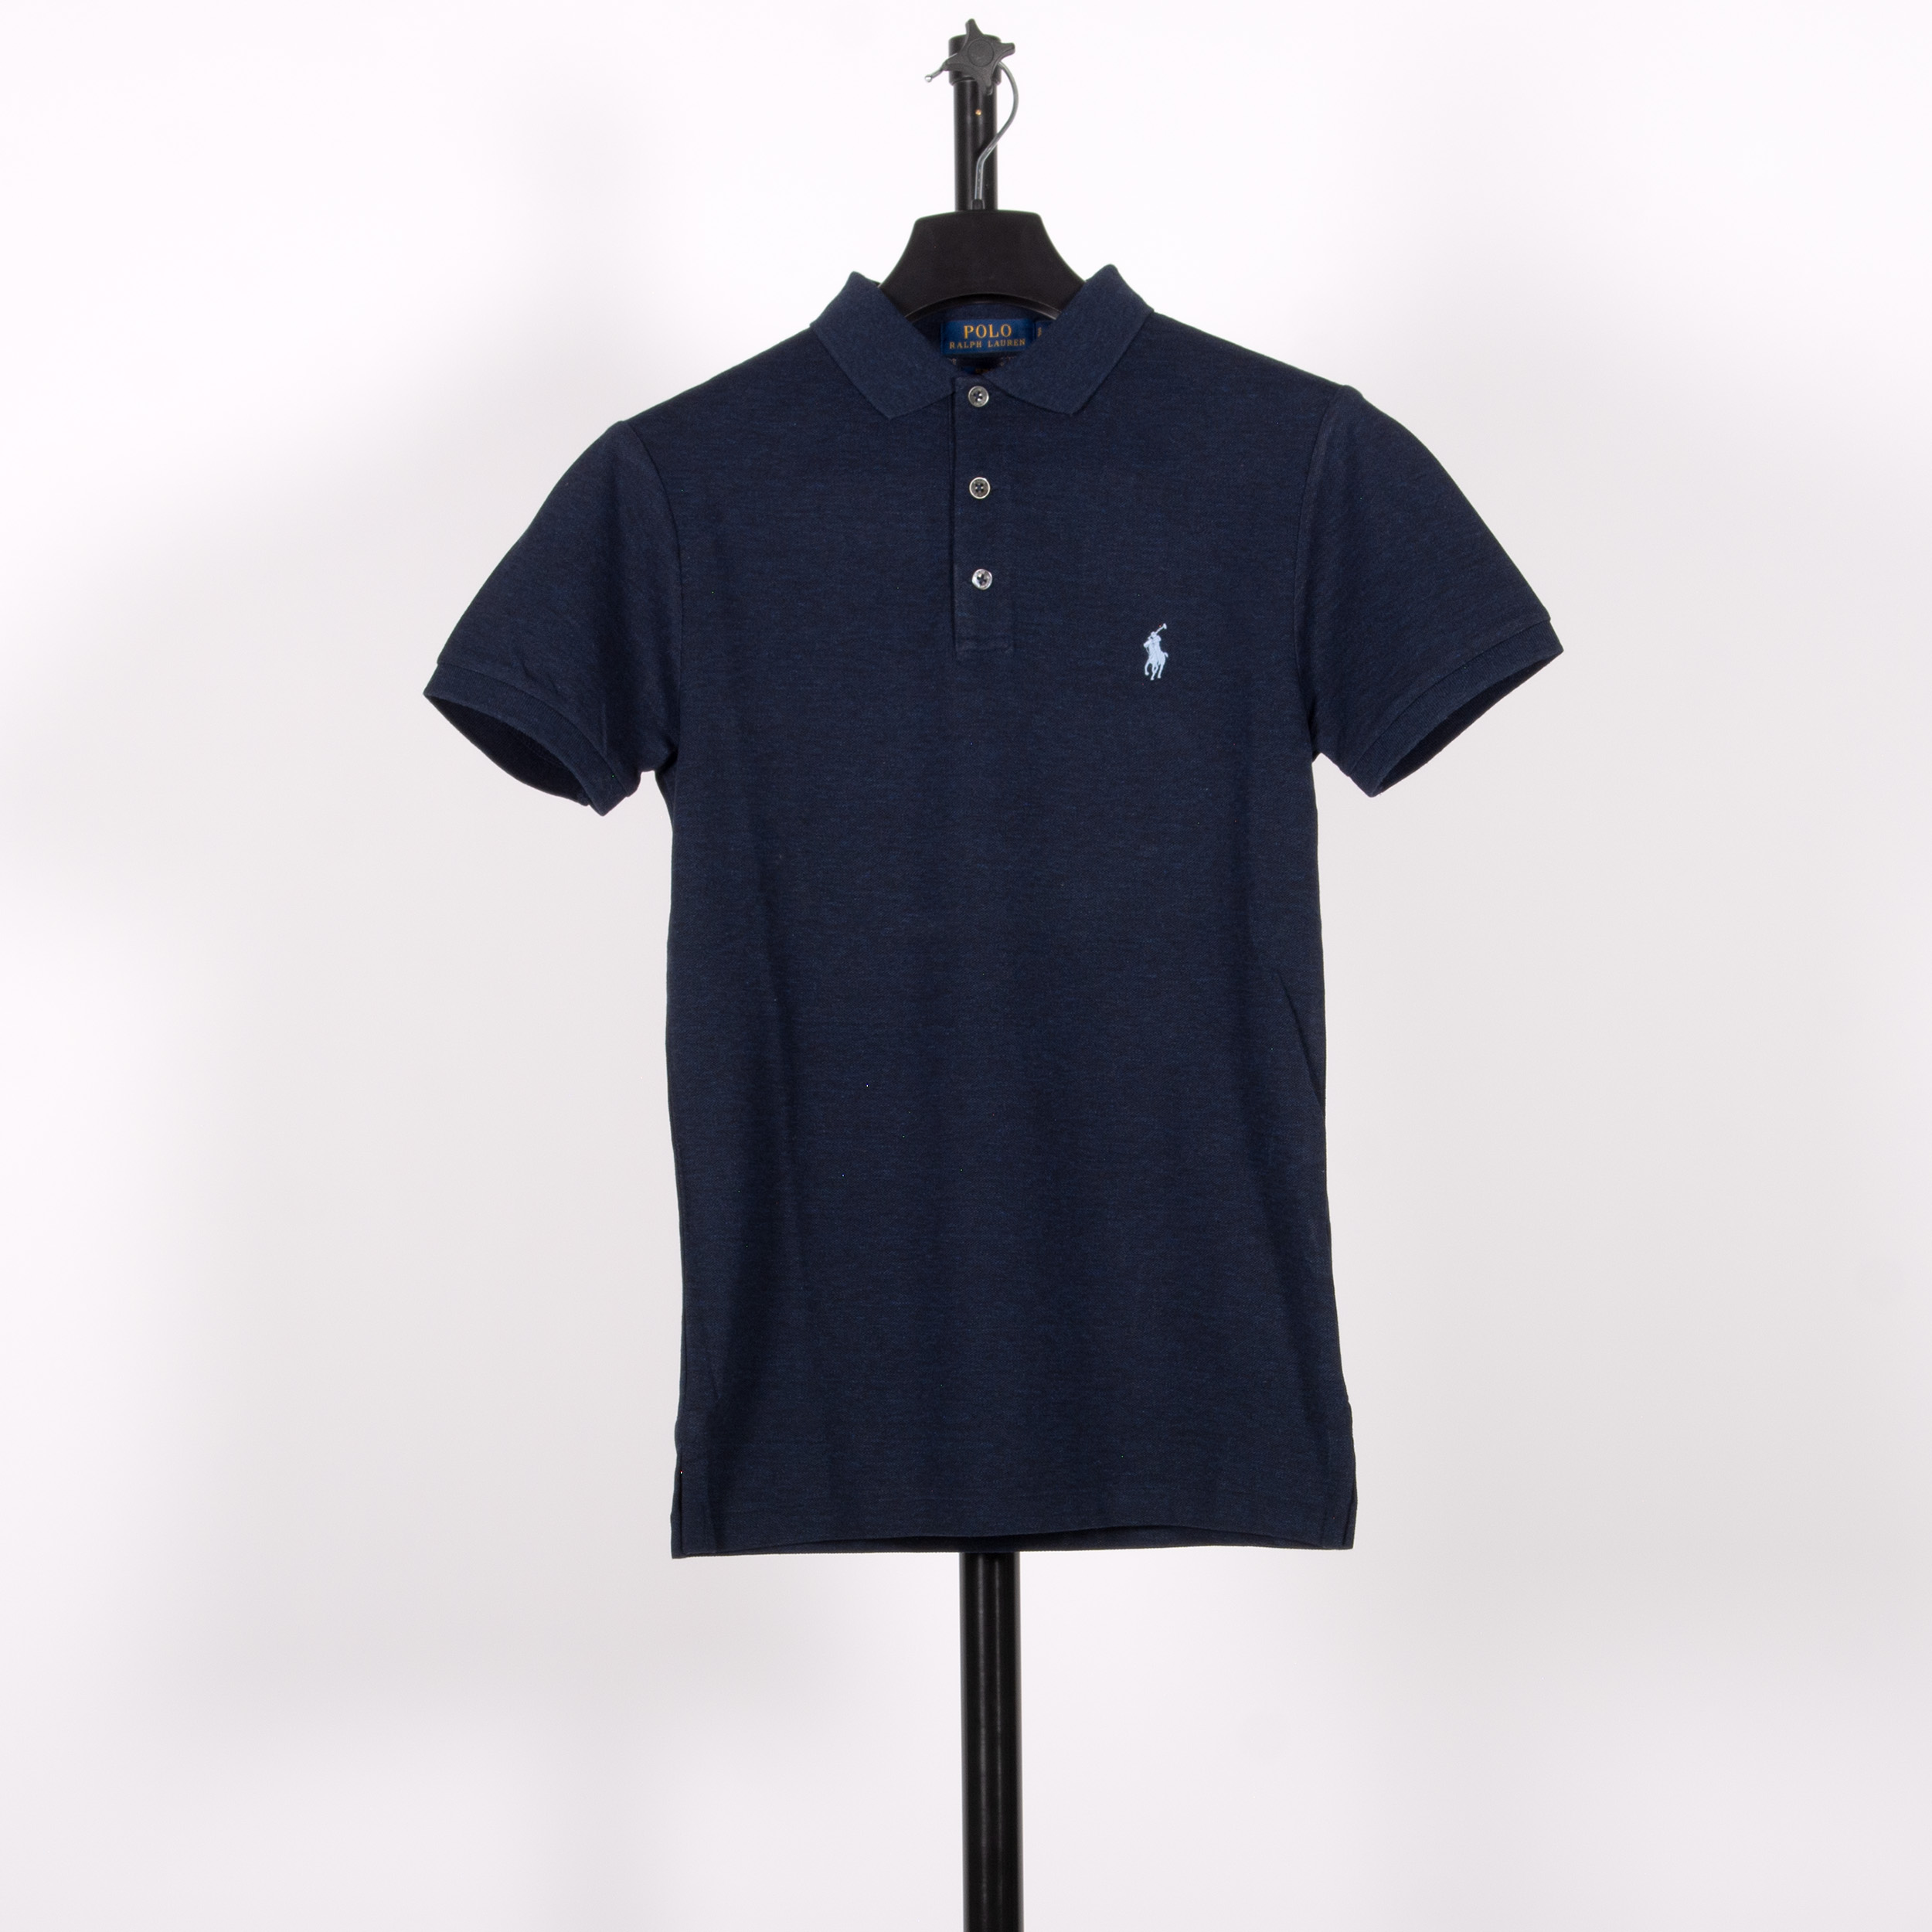 Polo Ralph Lauren AW19 Soft Touch Polo Spring Navy SRPING NAVY S M CLASSICS SSL-KNT